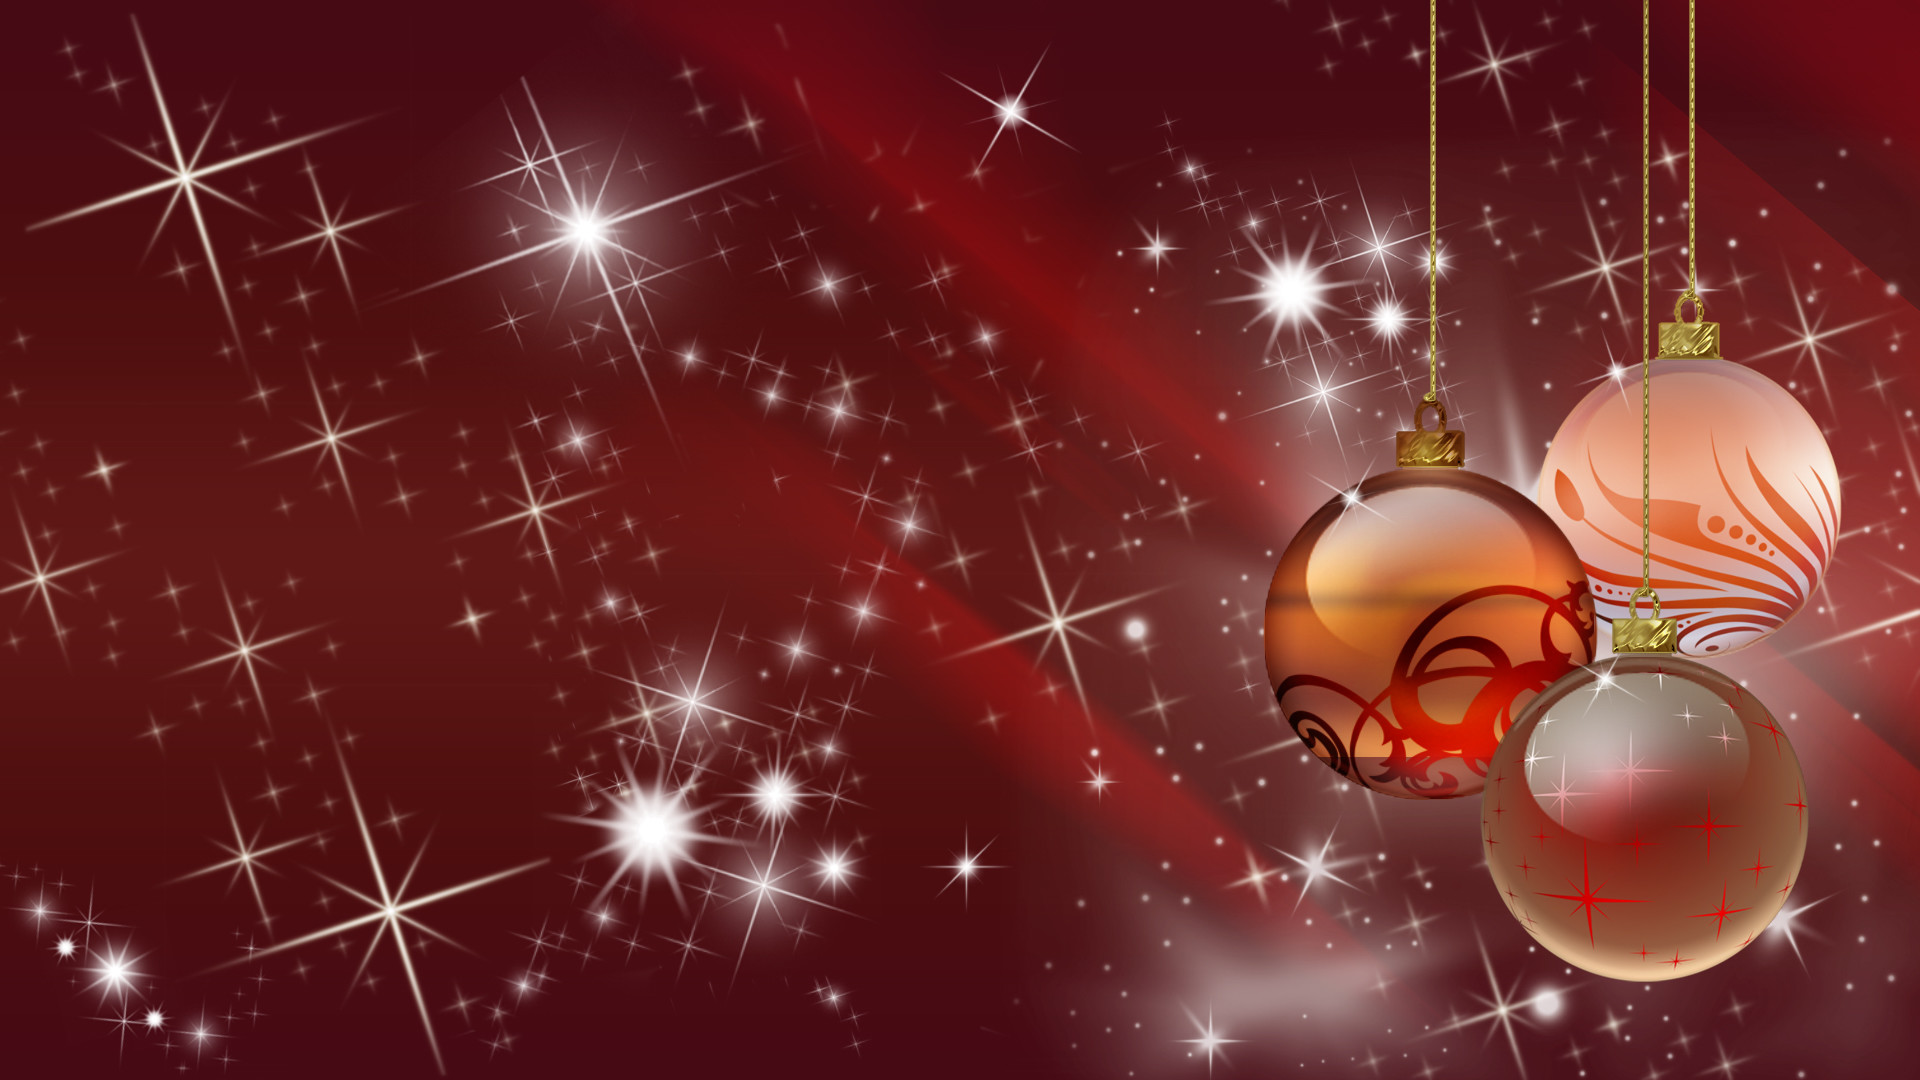 Free Christmas Wallpaper For Phones 18252 HD Wallpapers